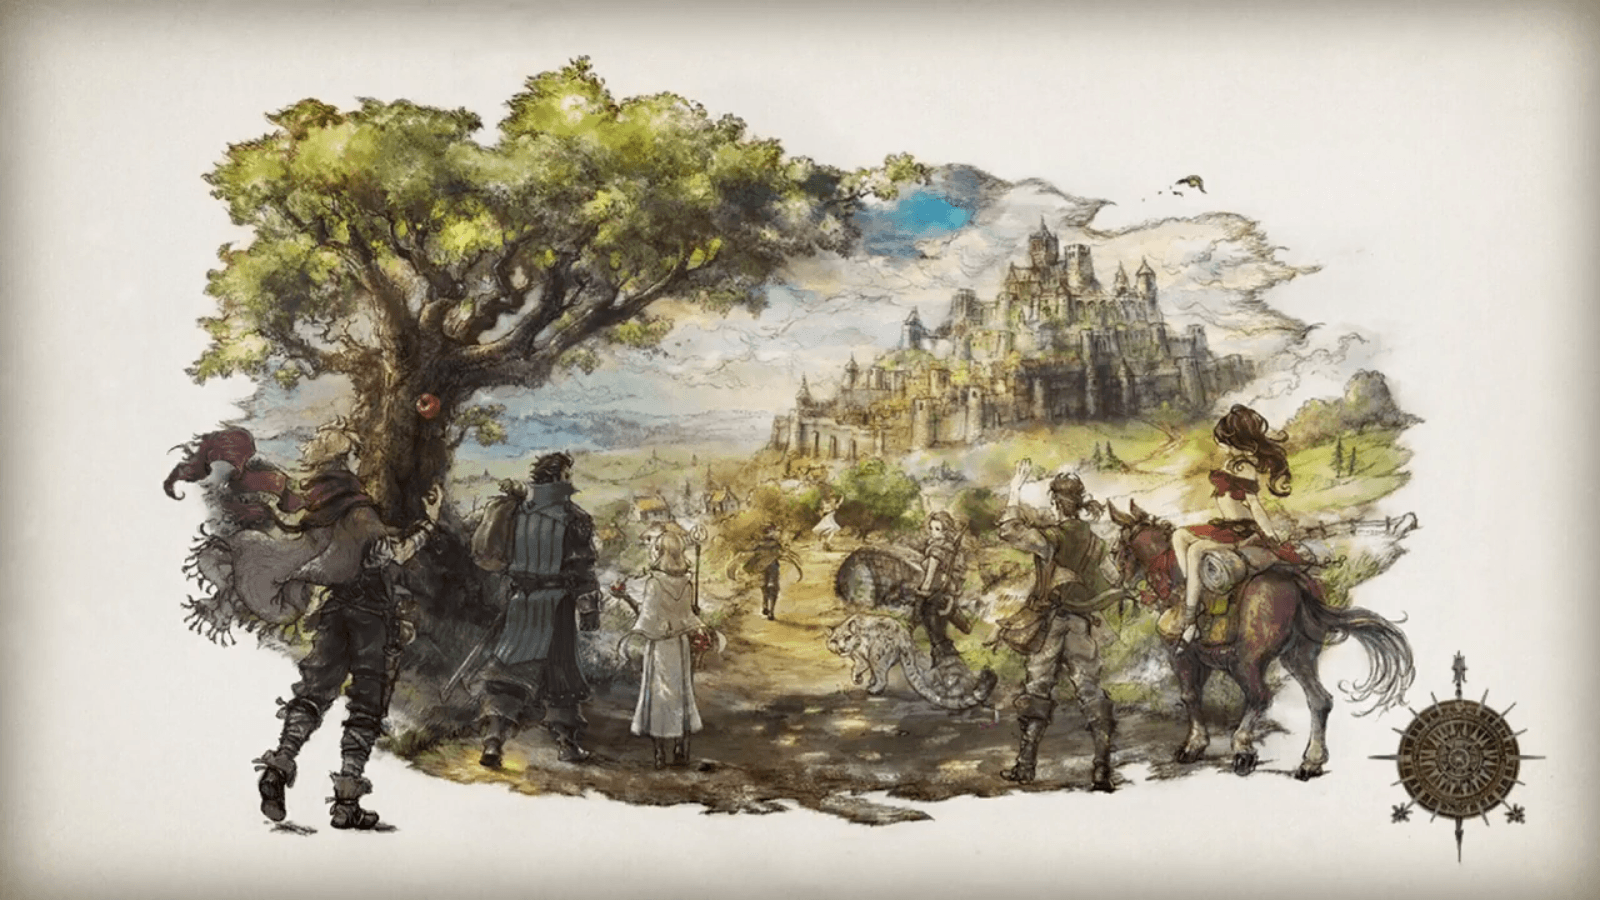 First Look at Octopath Traveler: A New Adventure RPG from Square Enix